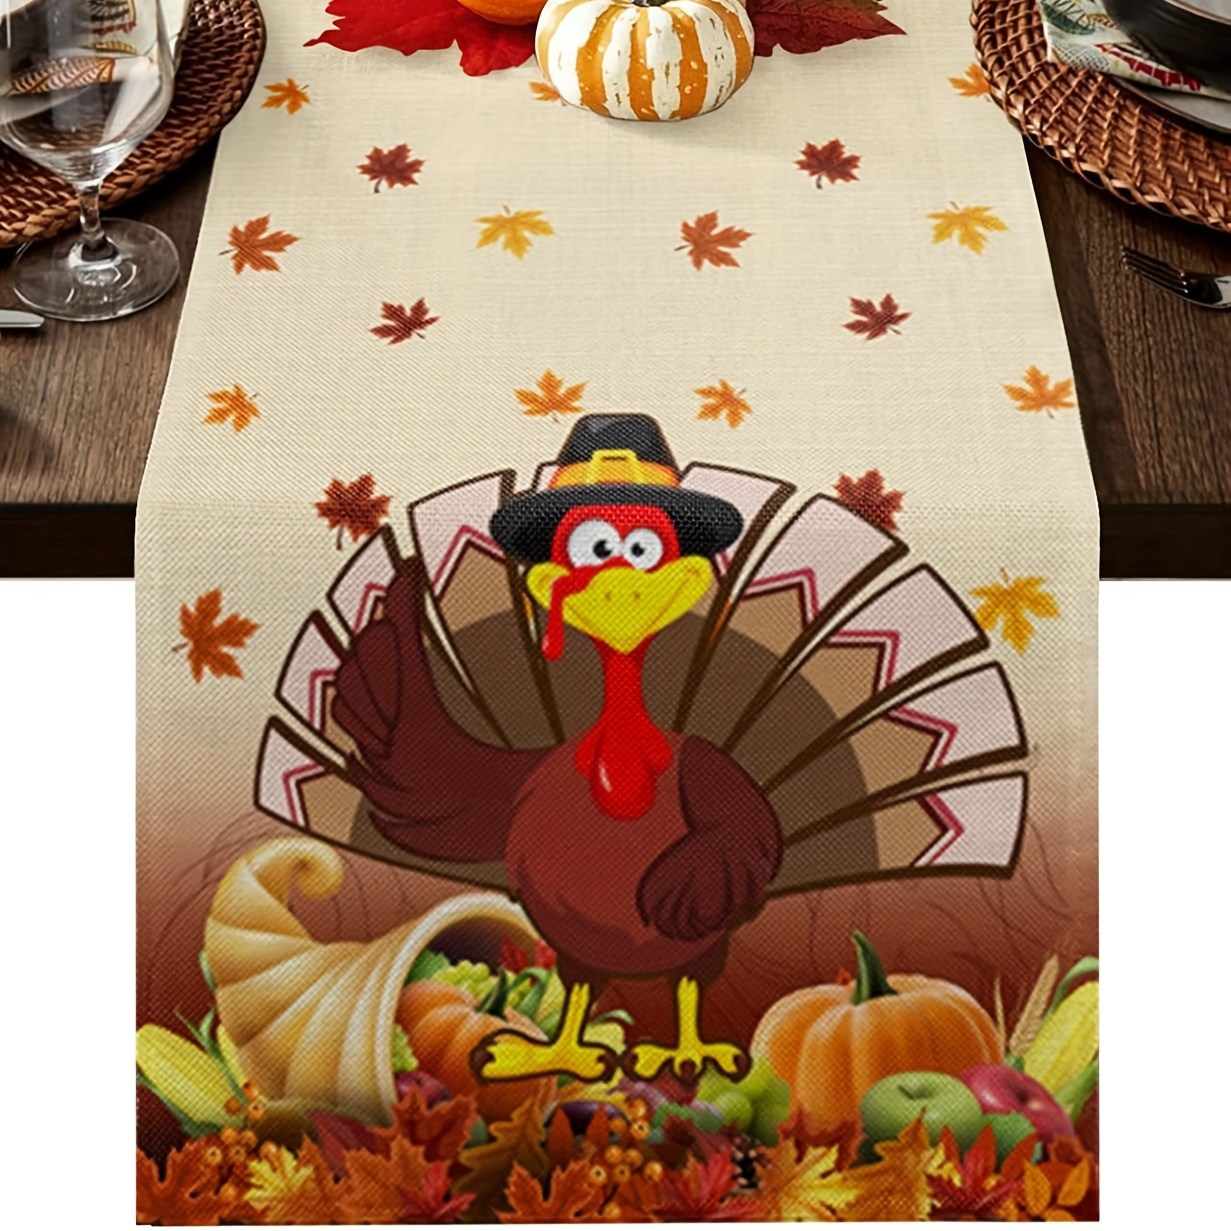  Big buy store Placemats Thanksgiving Pumpkin Gnome Truck Retro  Newspaper Heat-Resistant Washable Place Mats Non Slip, Table Mats for  Dinner Table Kitchen Outdoor Weeding Set of 6 : Home & Kitchen